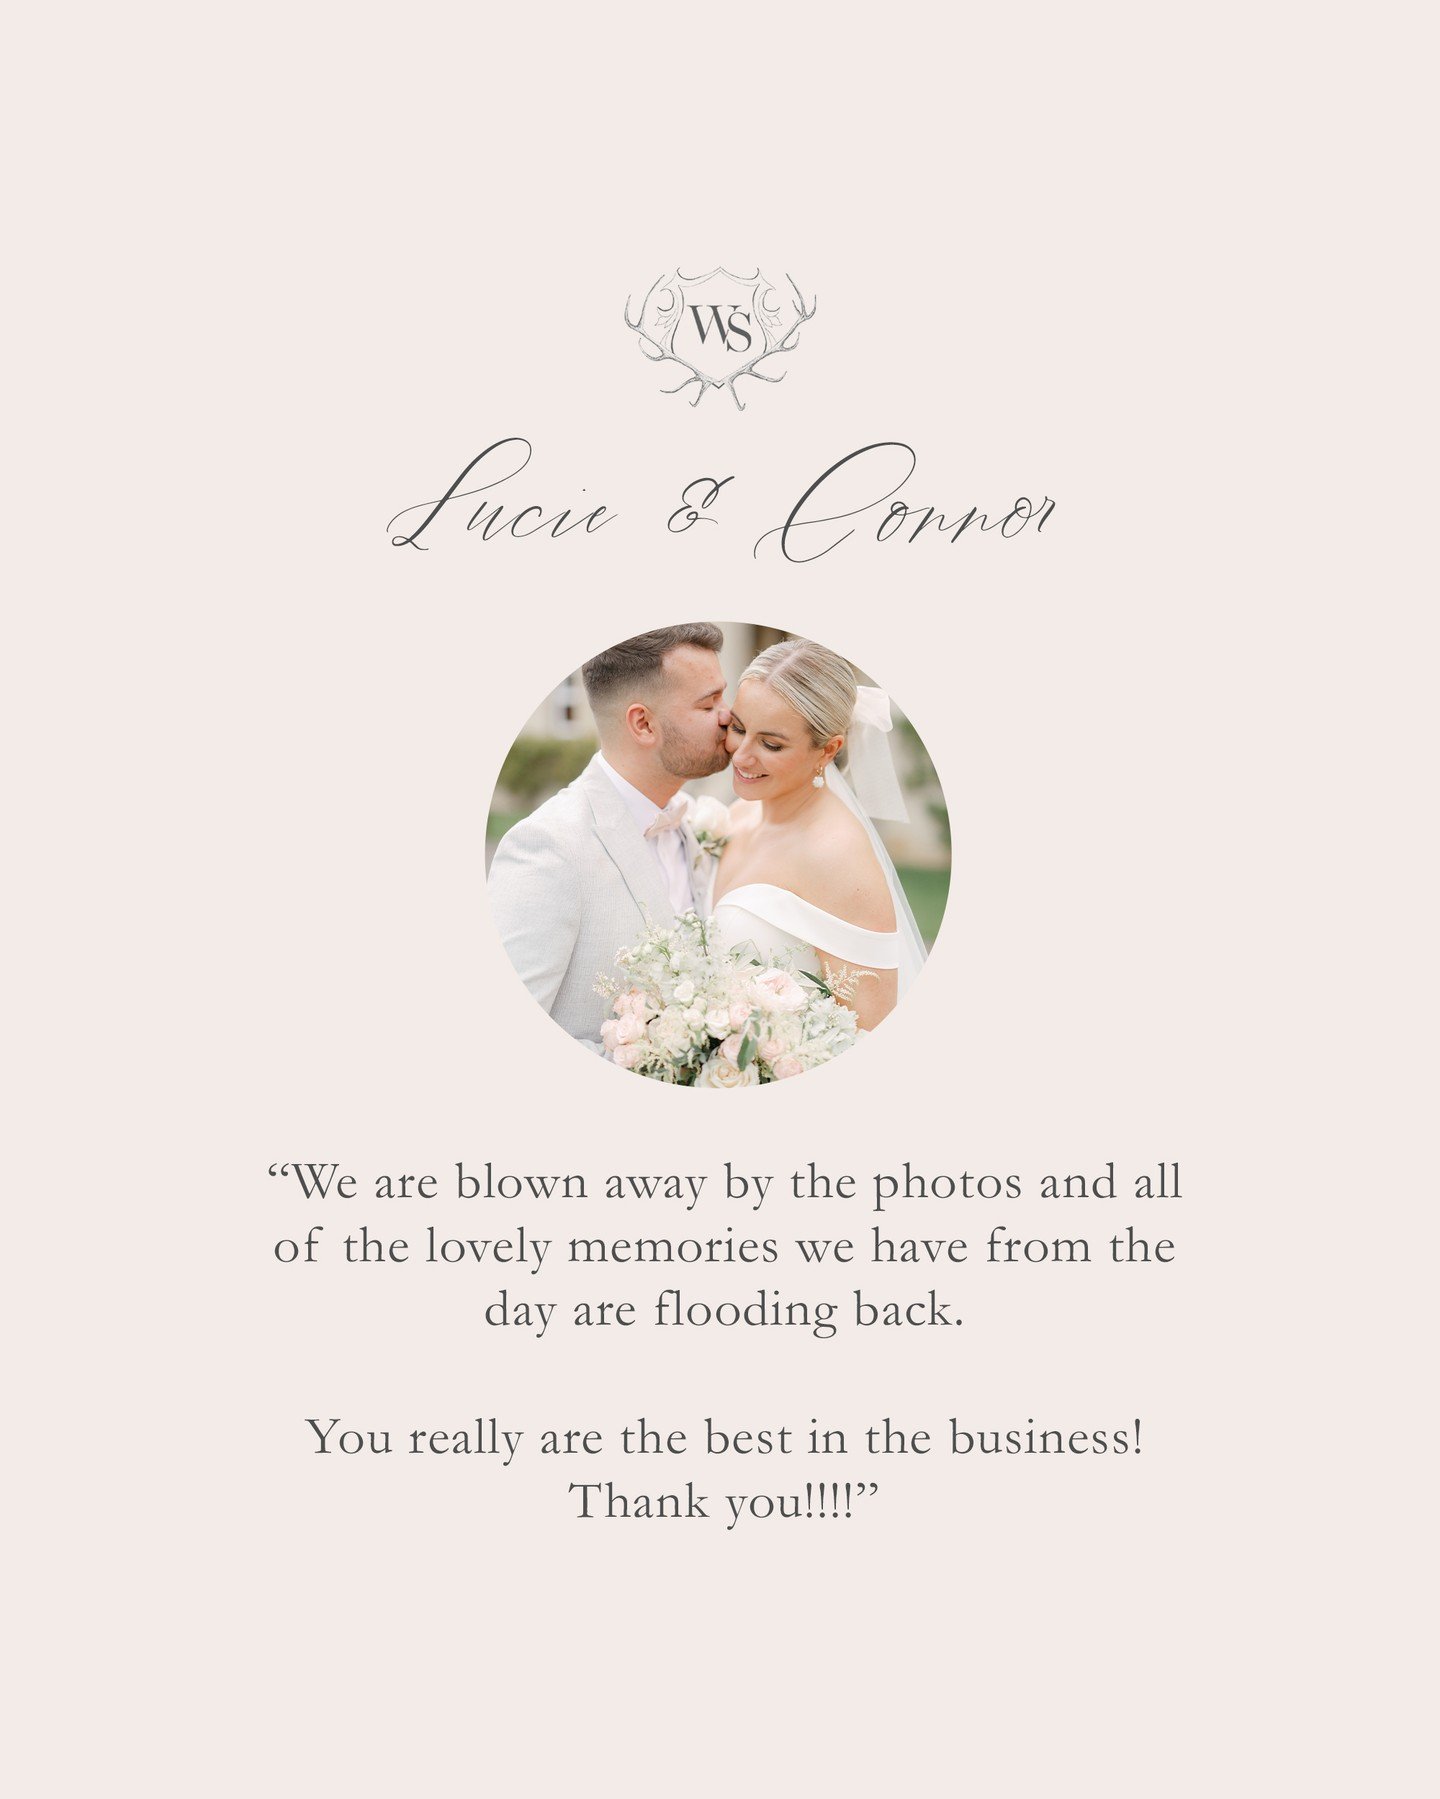 Client Review: &quot;We are blown away by the photos and all of the lovely memories we have from the day are flooding back. You really are the best in the business! Thank you!!!!&quot; - L&amp;C

Venue:@elmorecourt
Photography: @whitestagweddings
Sta